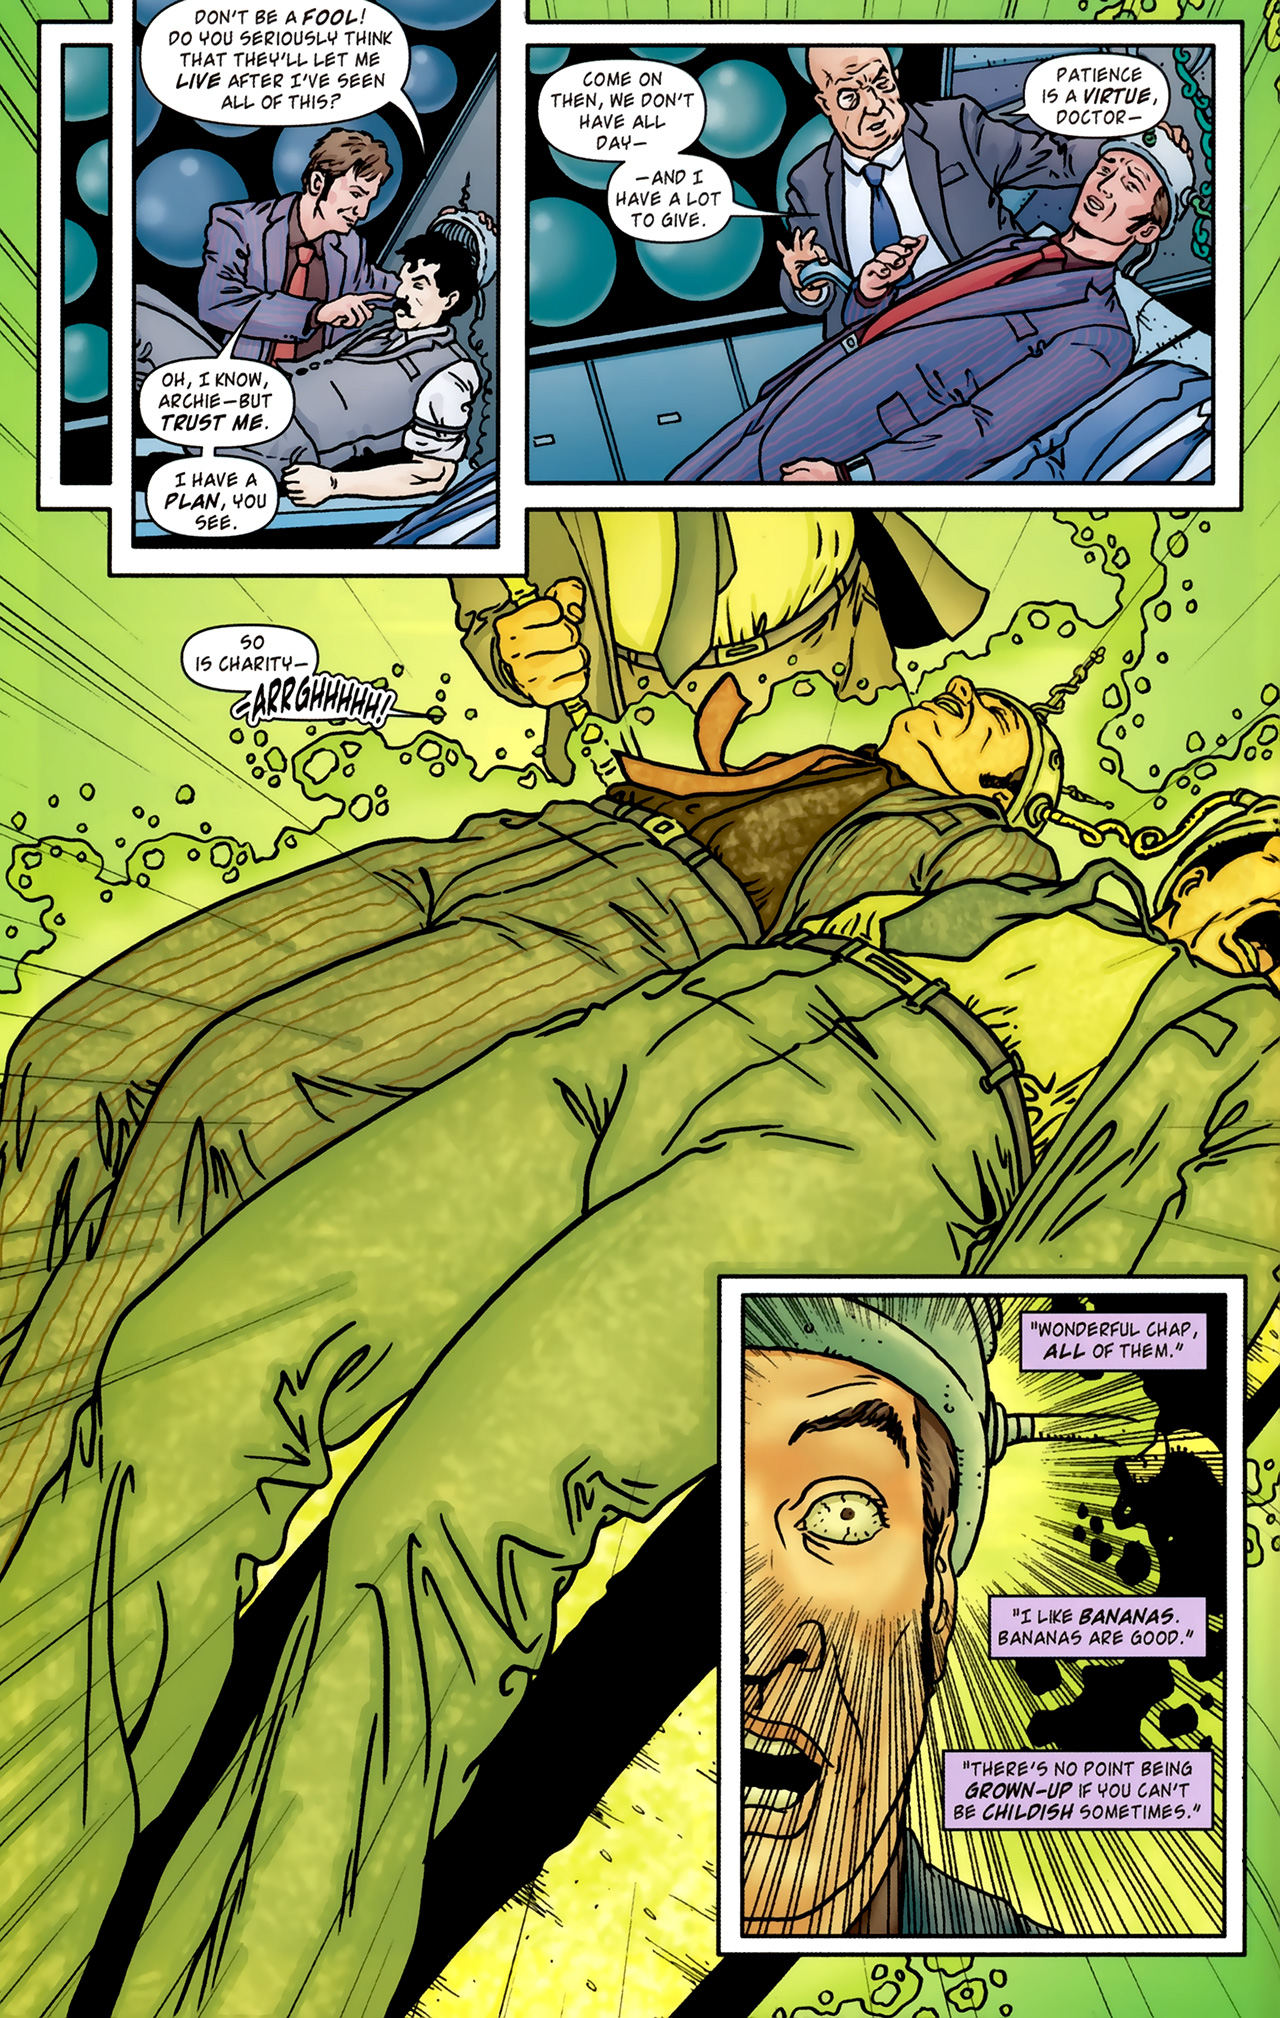 Doctor Who (2009) issue 2 - Page 8